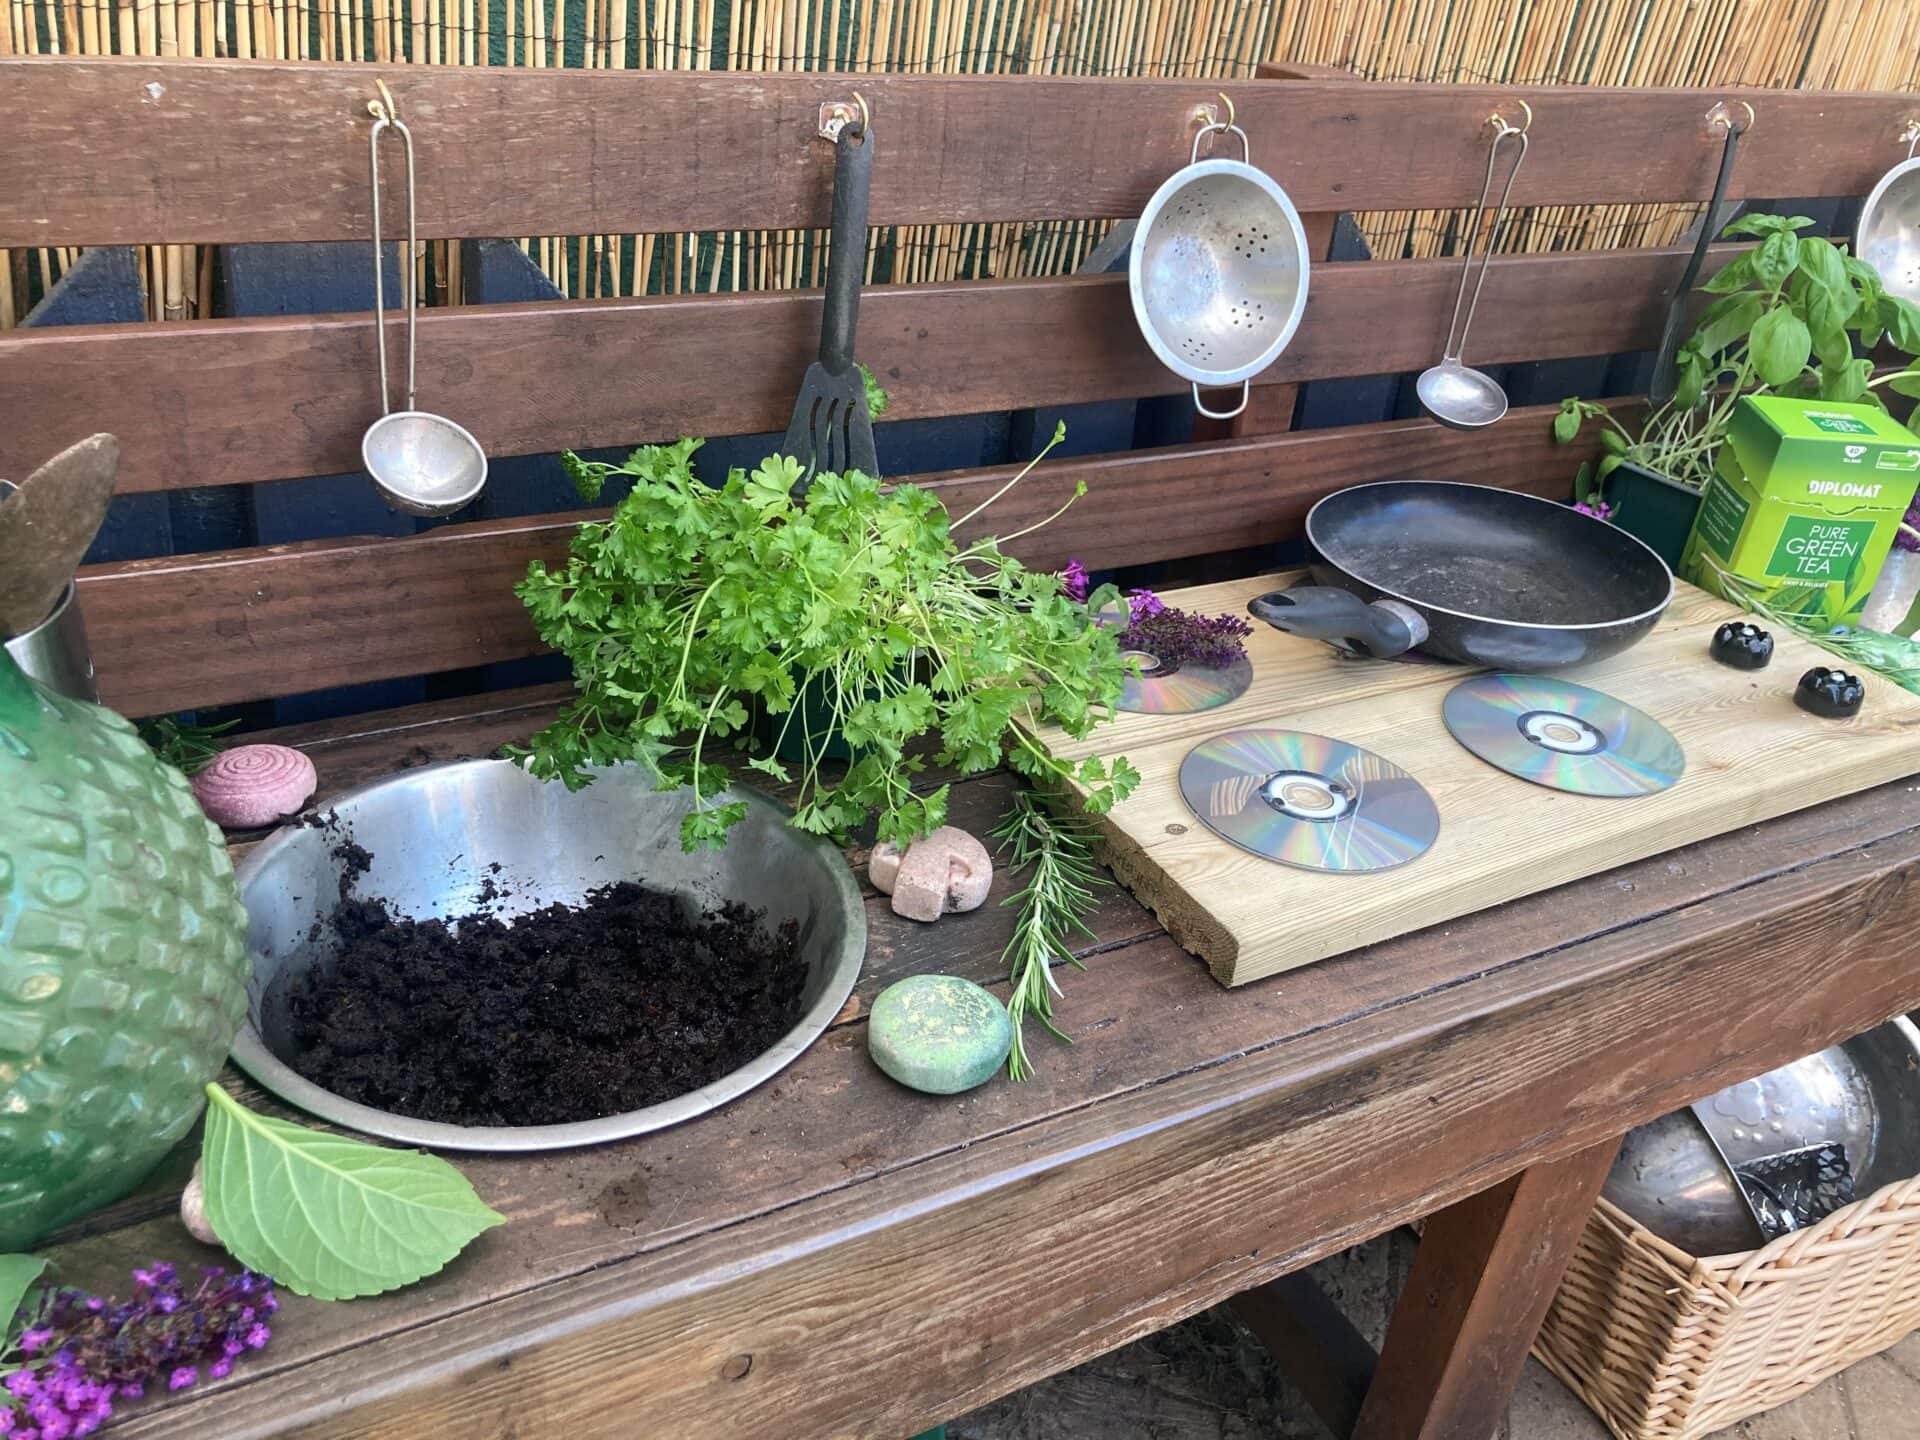 A wooden table with pots and pans on it.